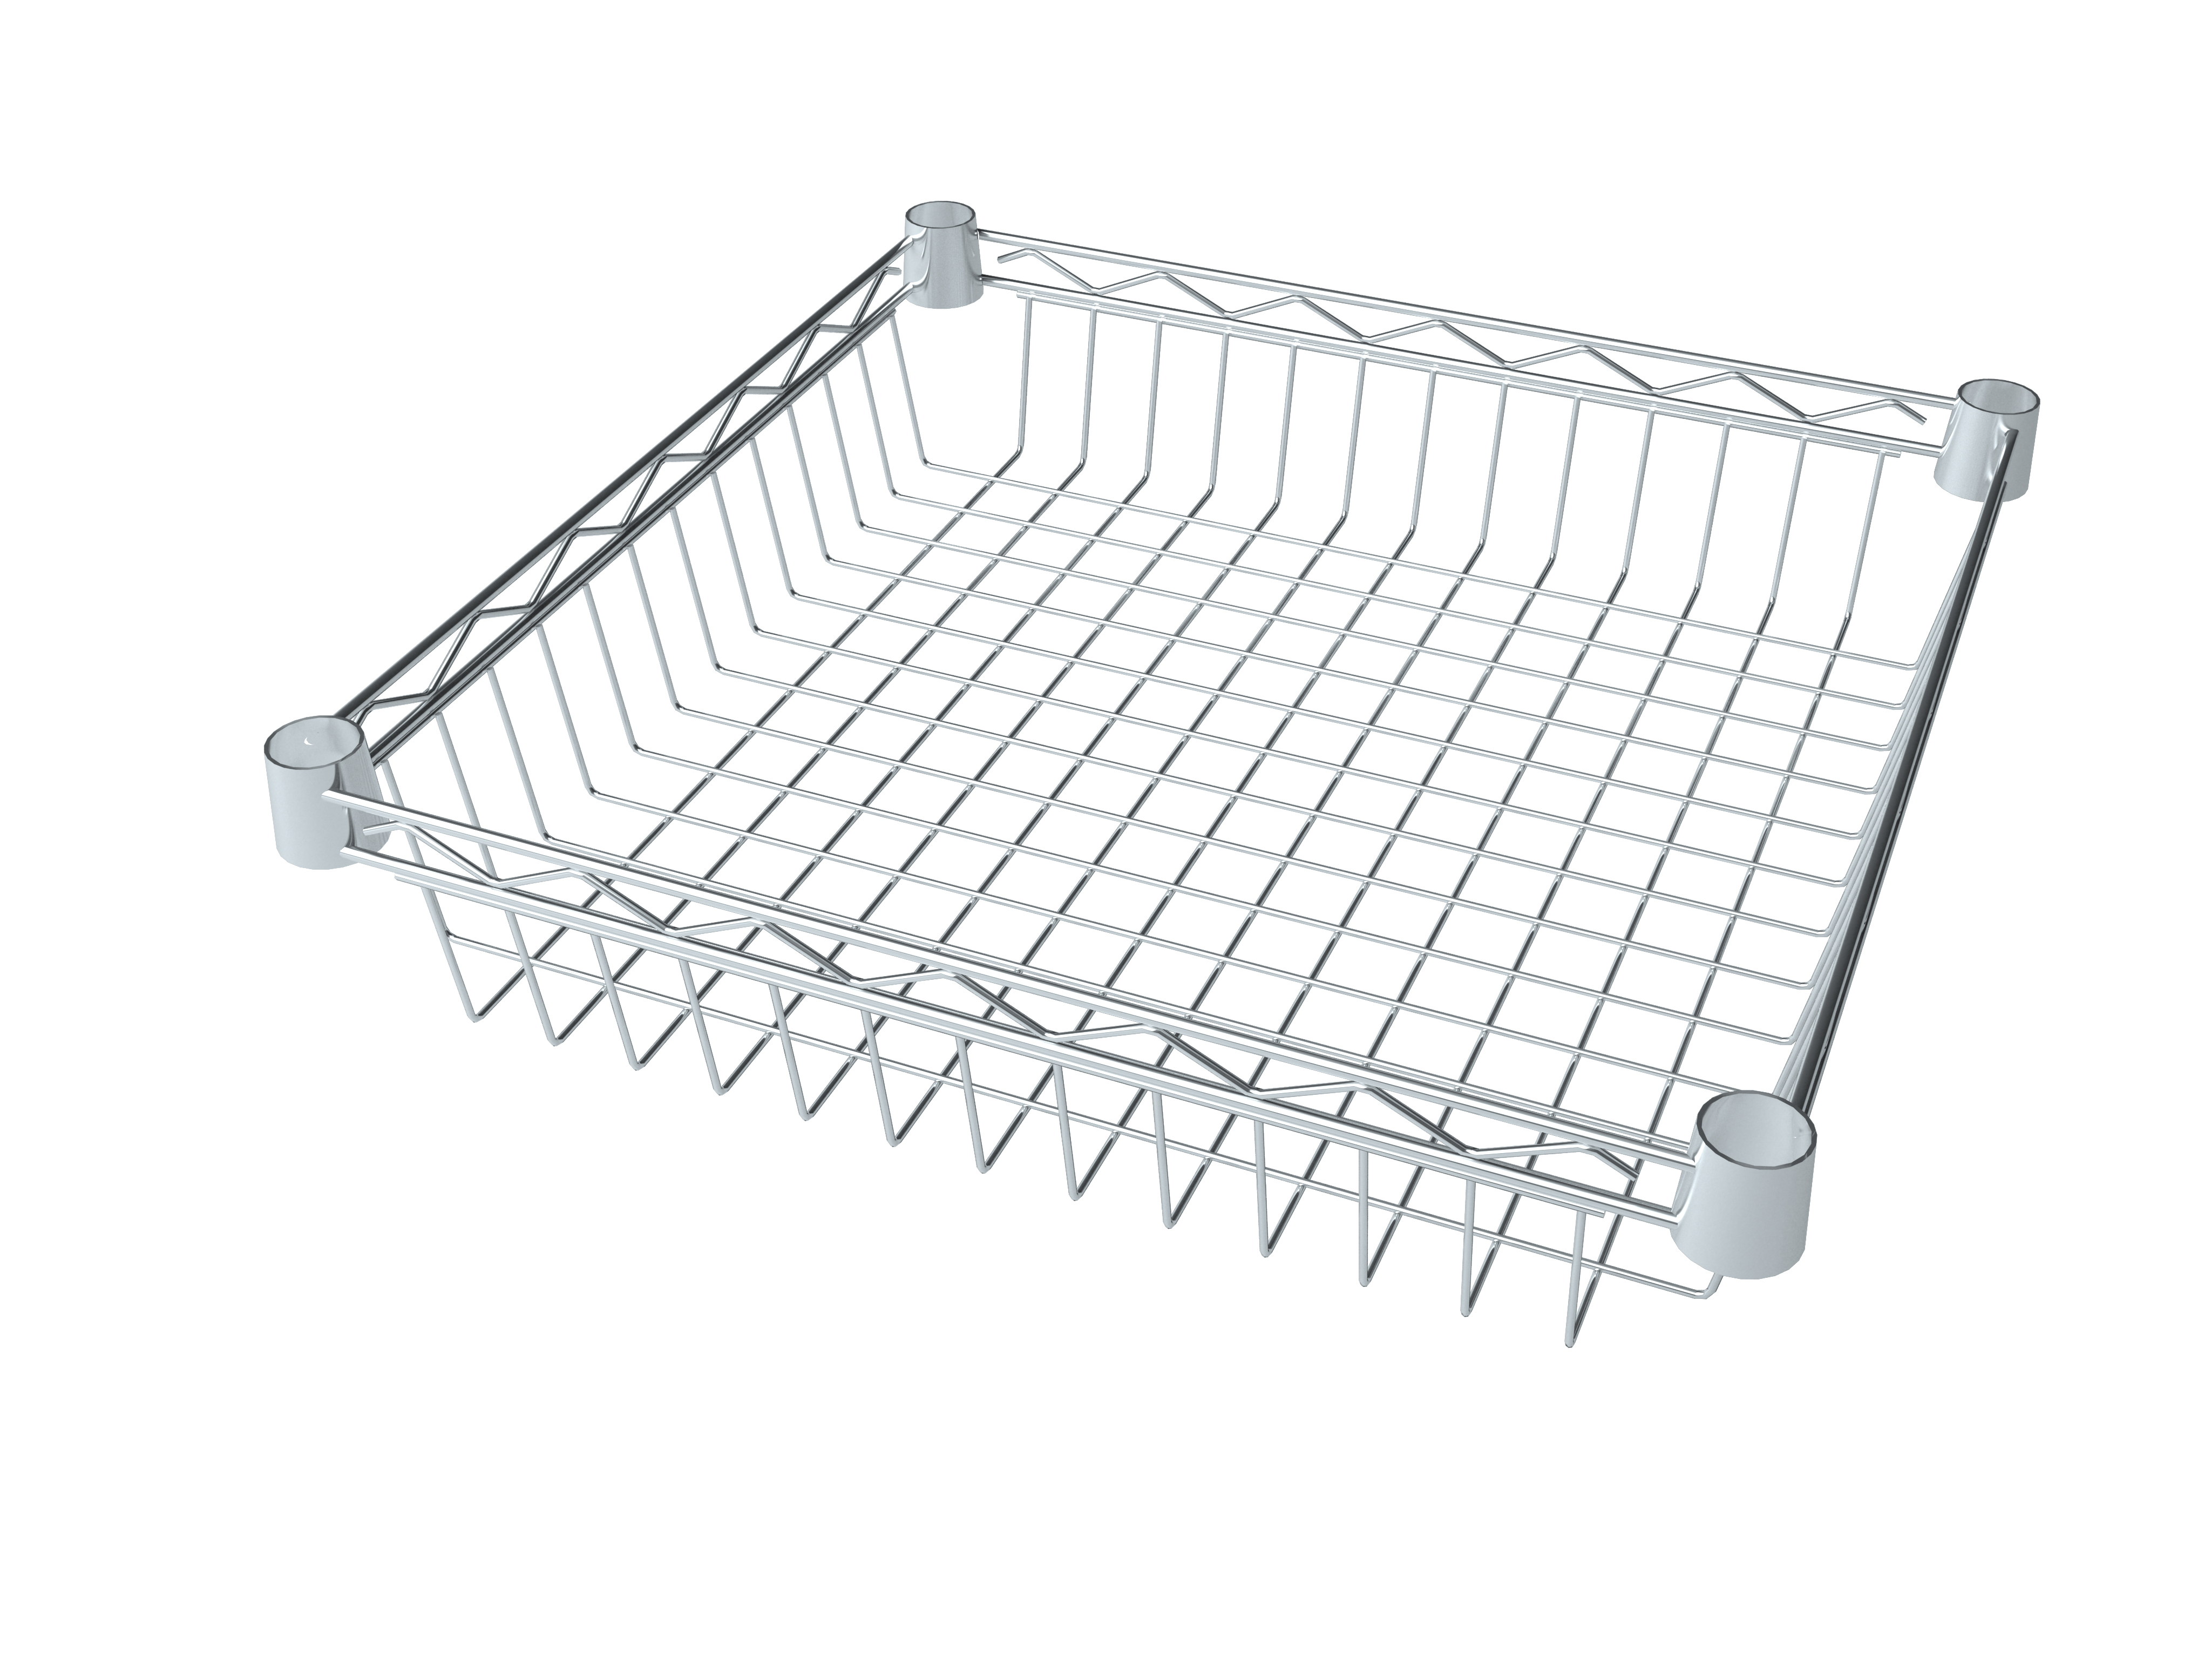 HSS Extra Wire Basket 16"x16"x4" Deep Fits on 7/8" Pole Diameter, Chrome - image 1 of 3